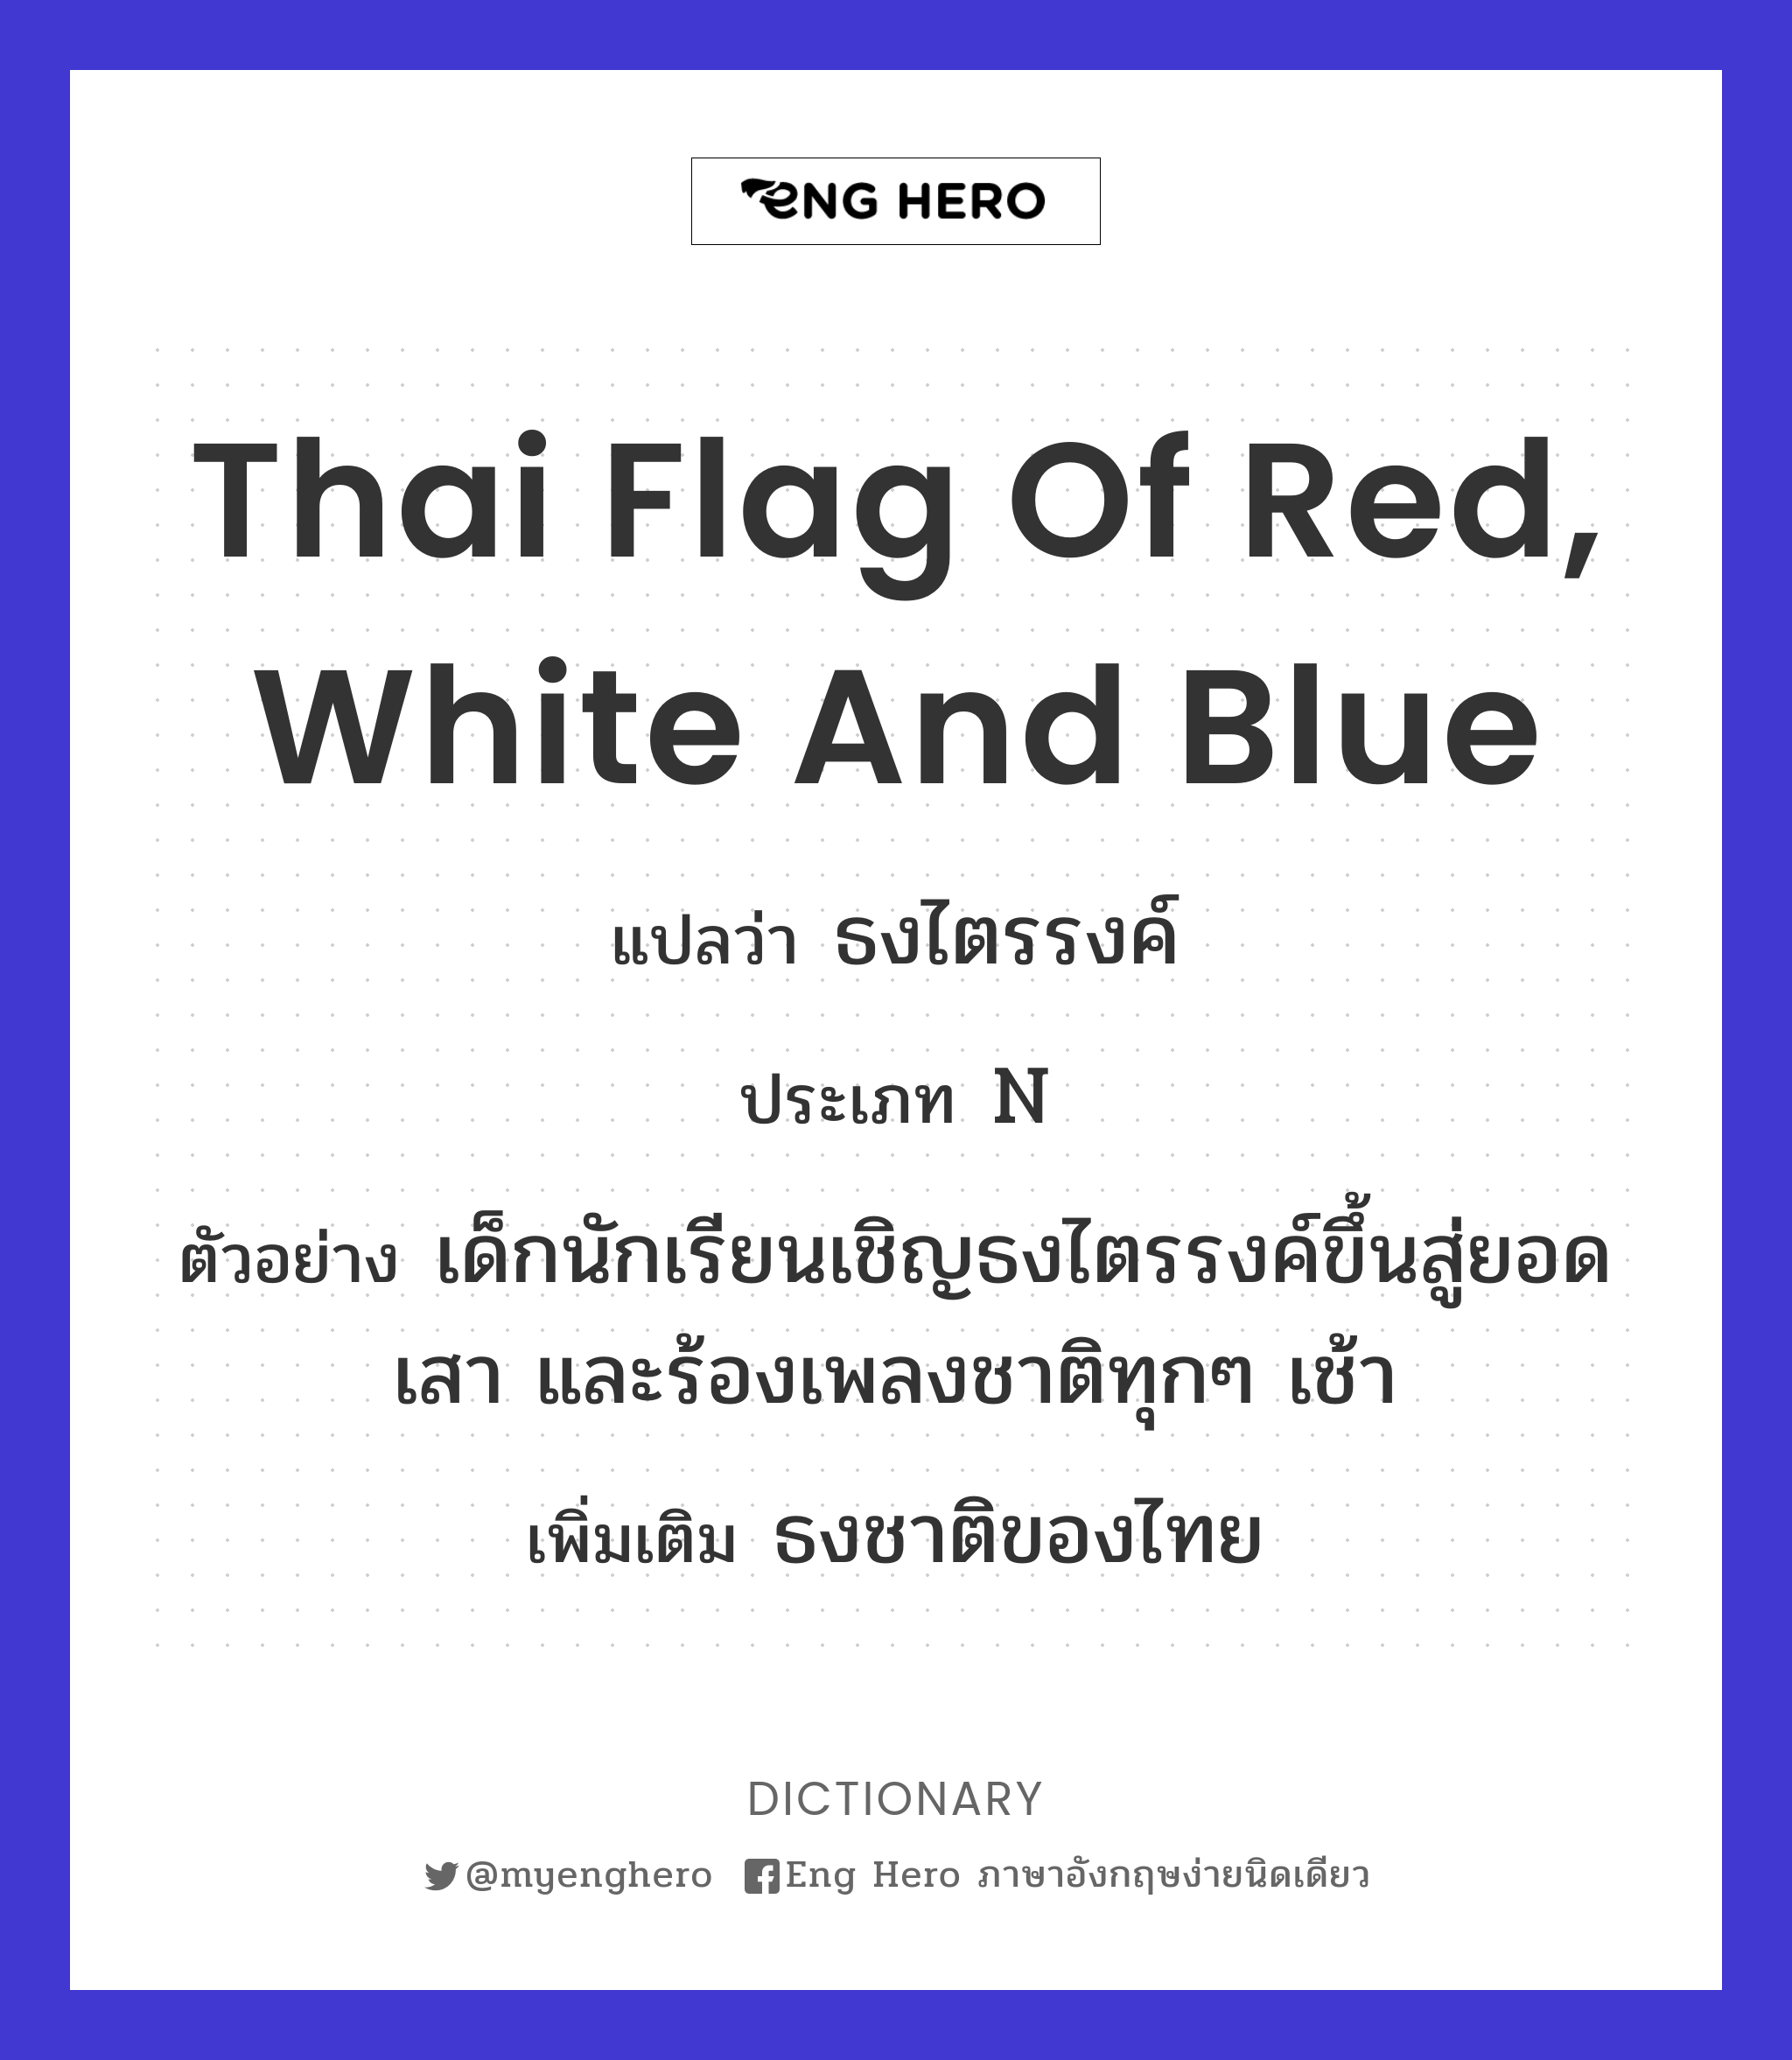 Thai flag of red, white and blue